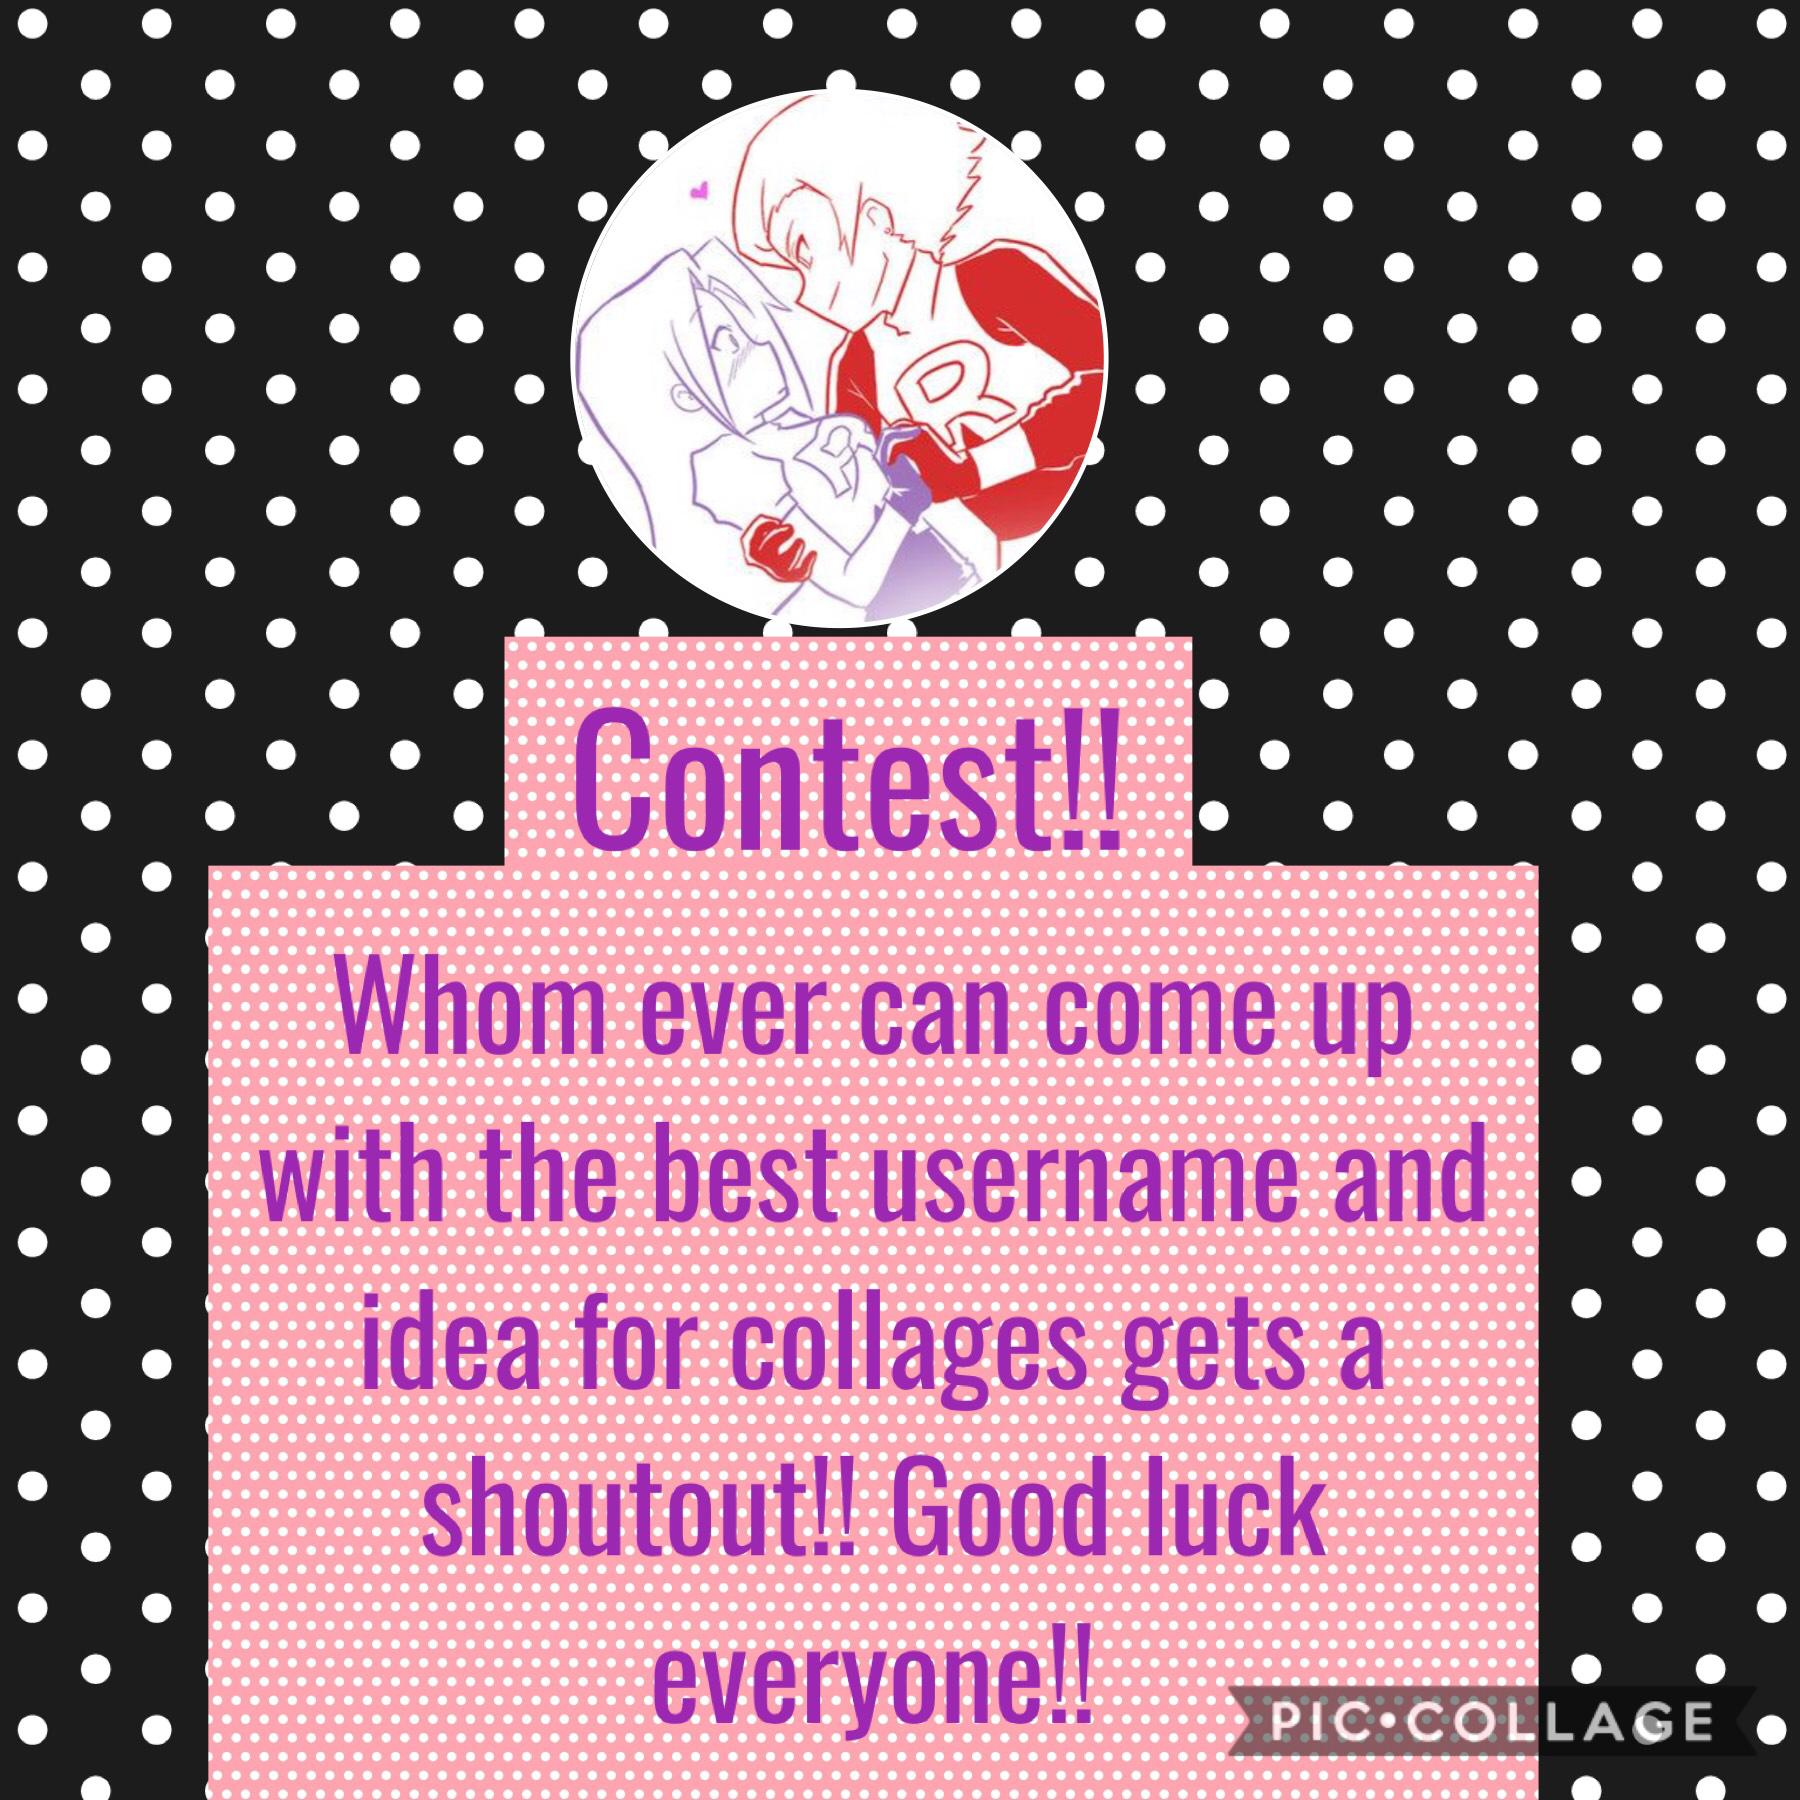 Contest!! Please enter by February 1st!